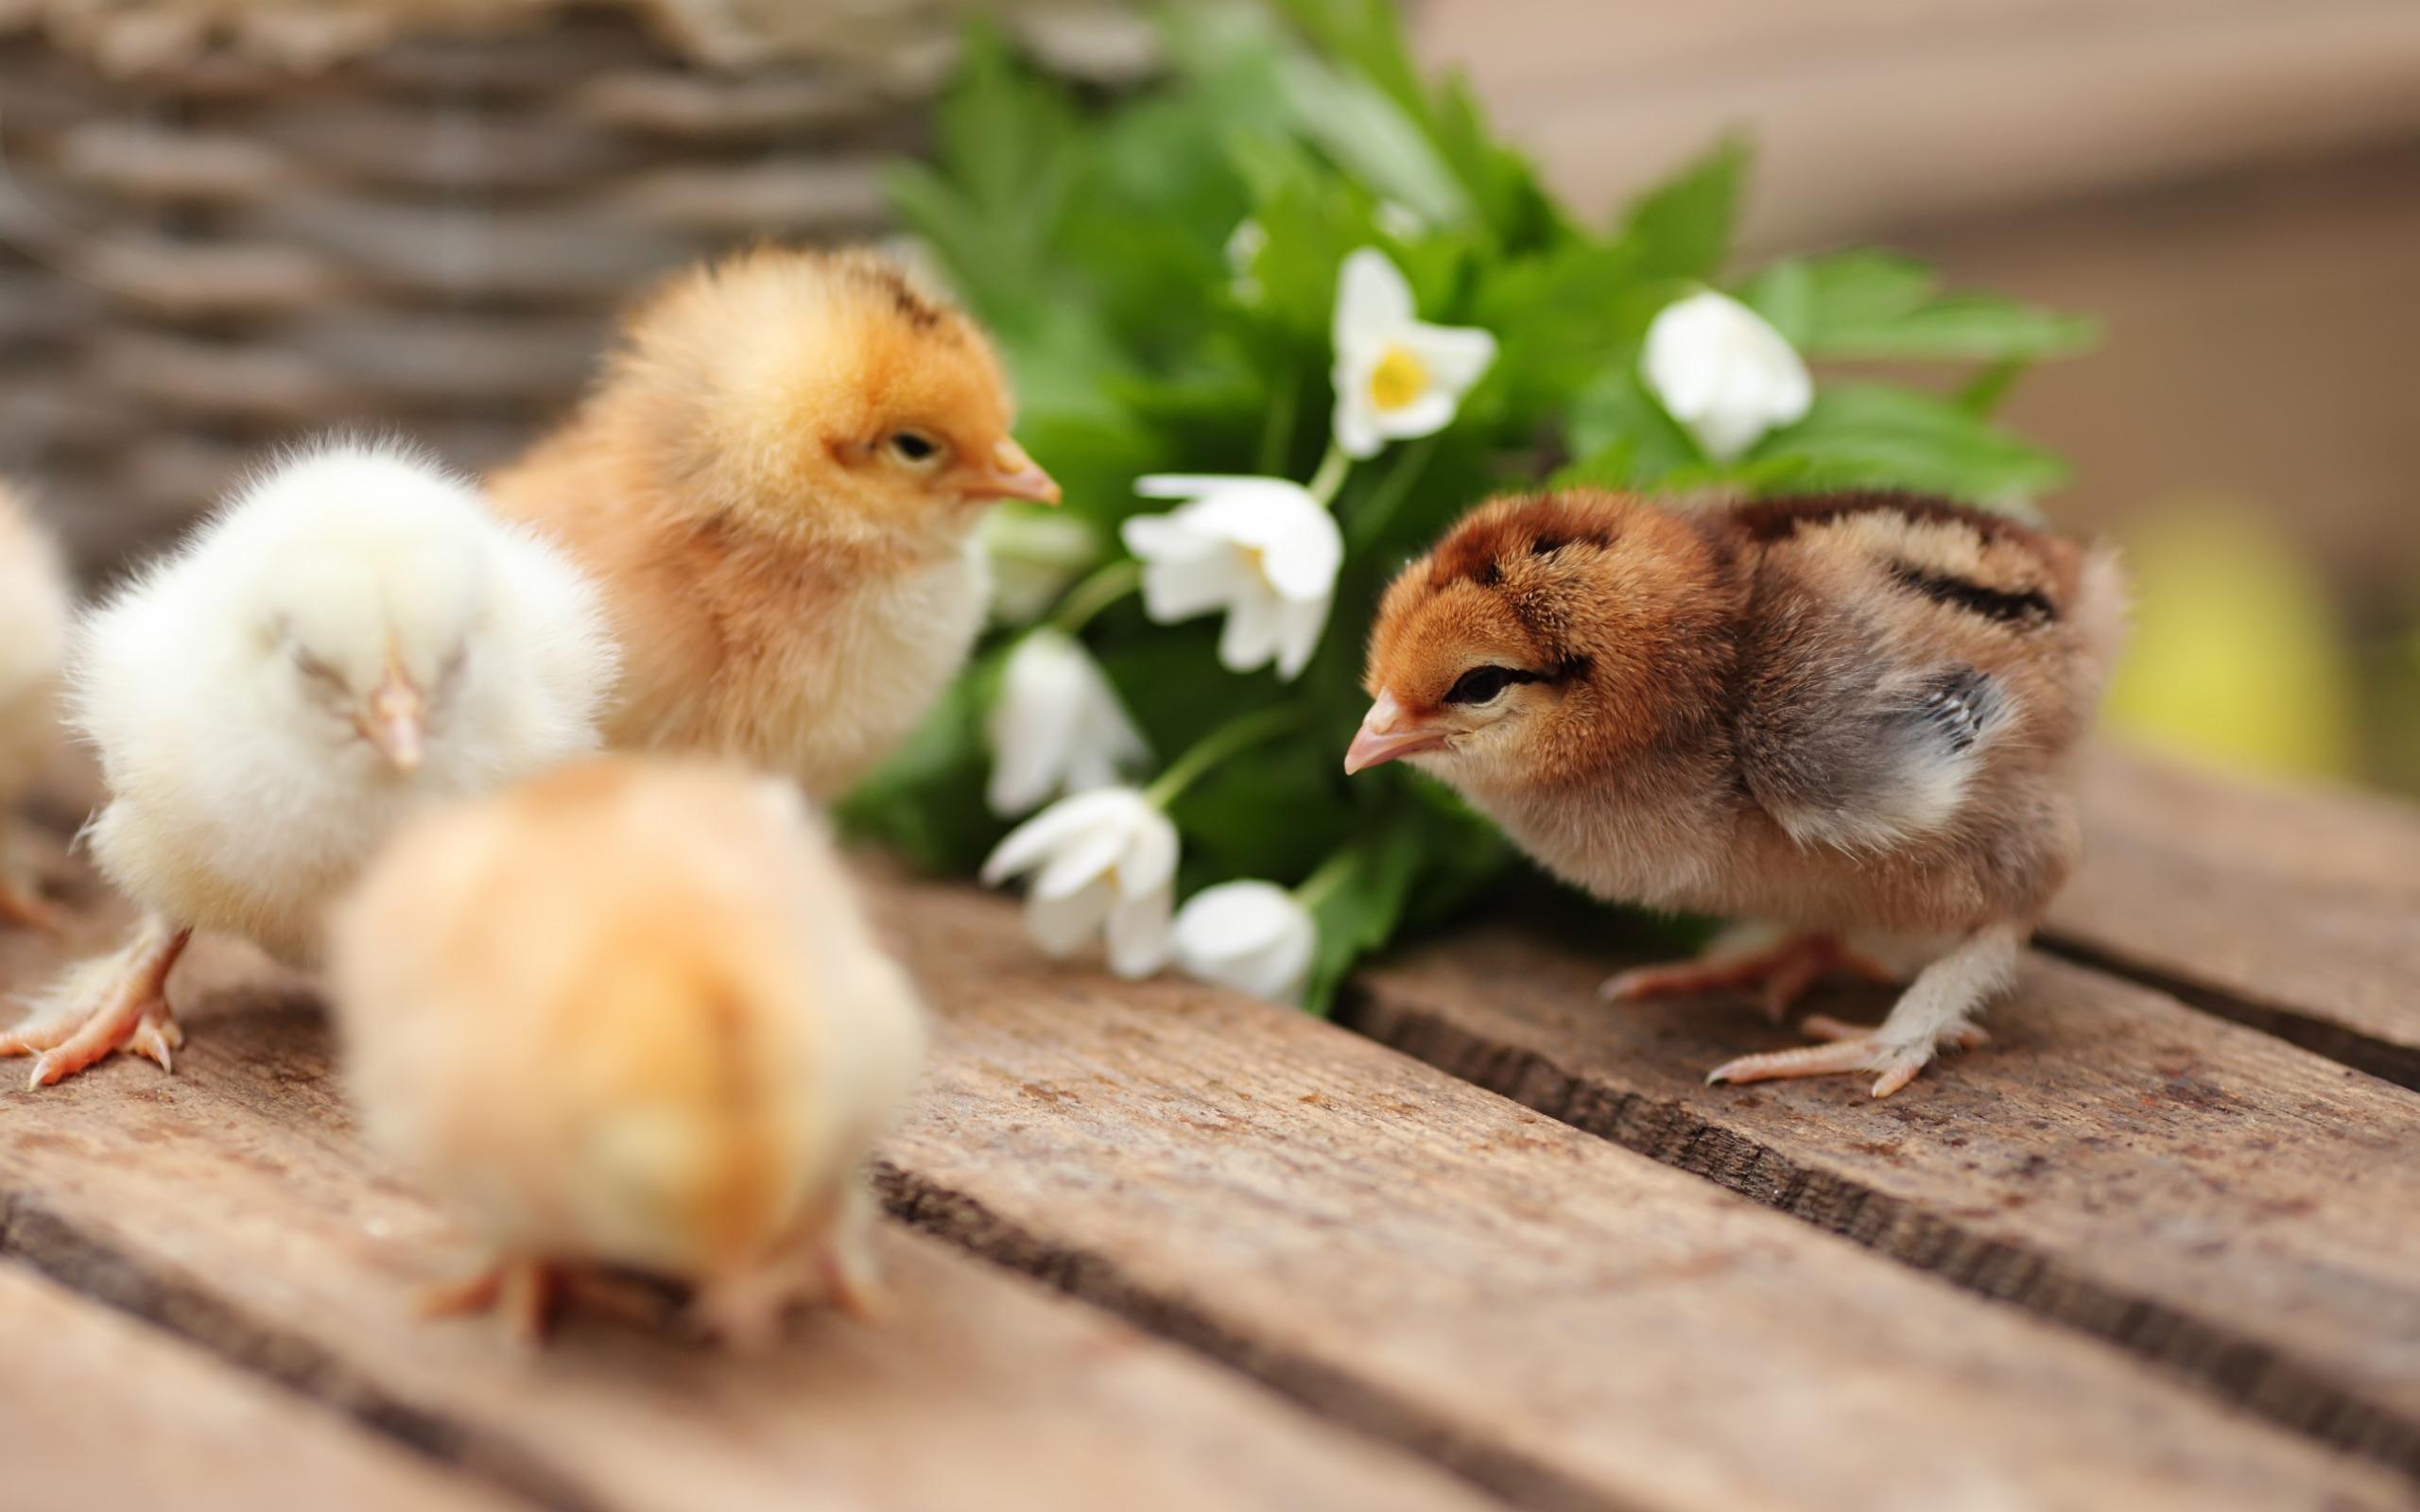 Download wallpaper Chickens, small birds, spring, cute